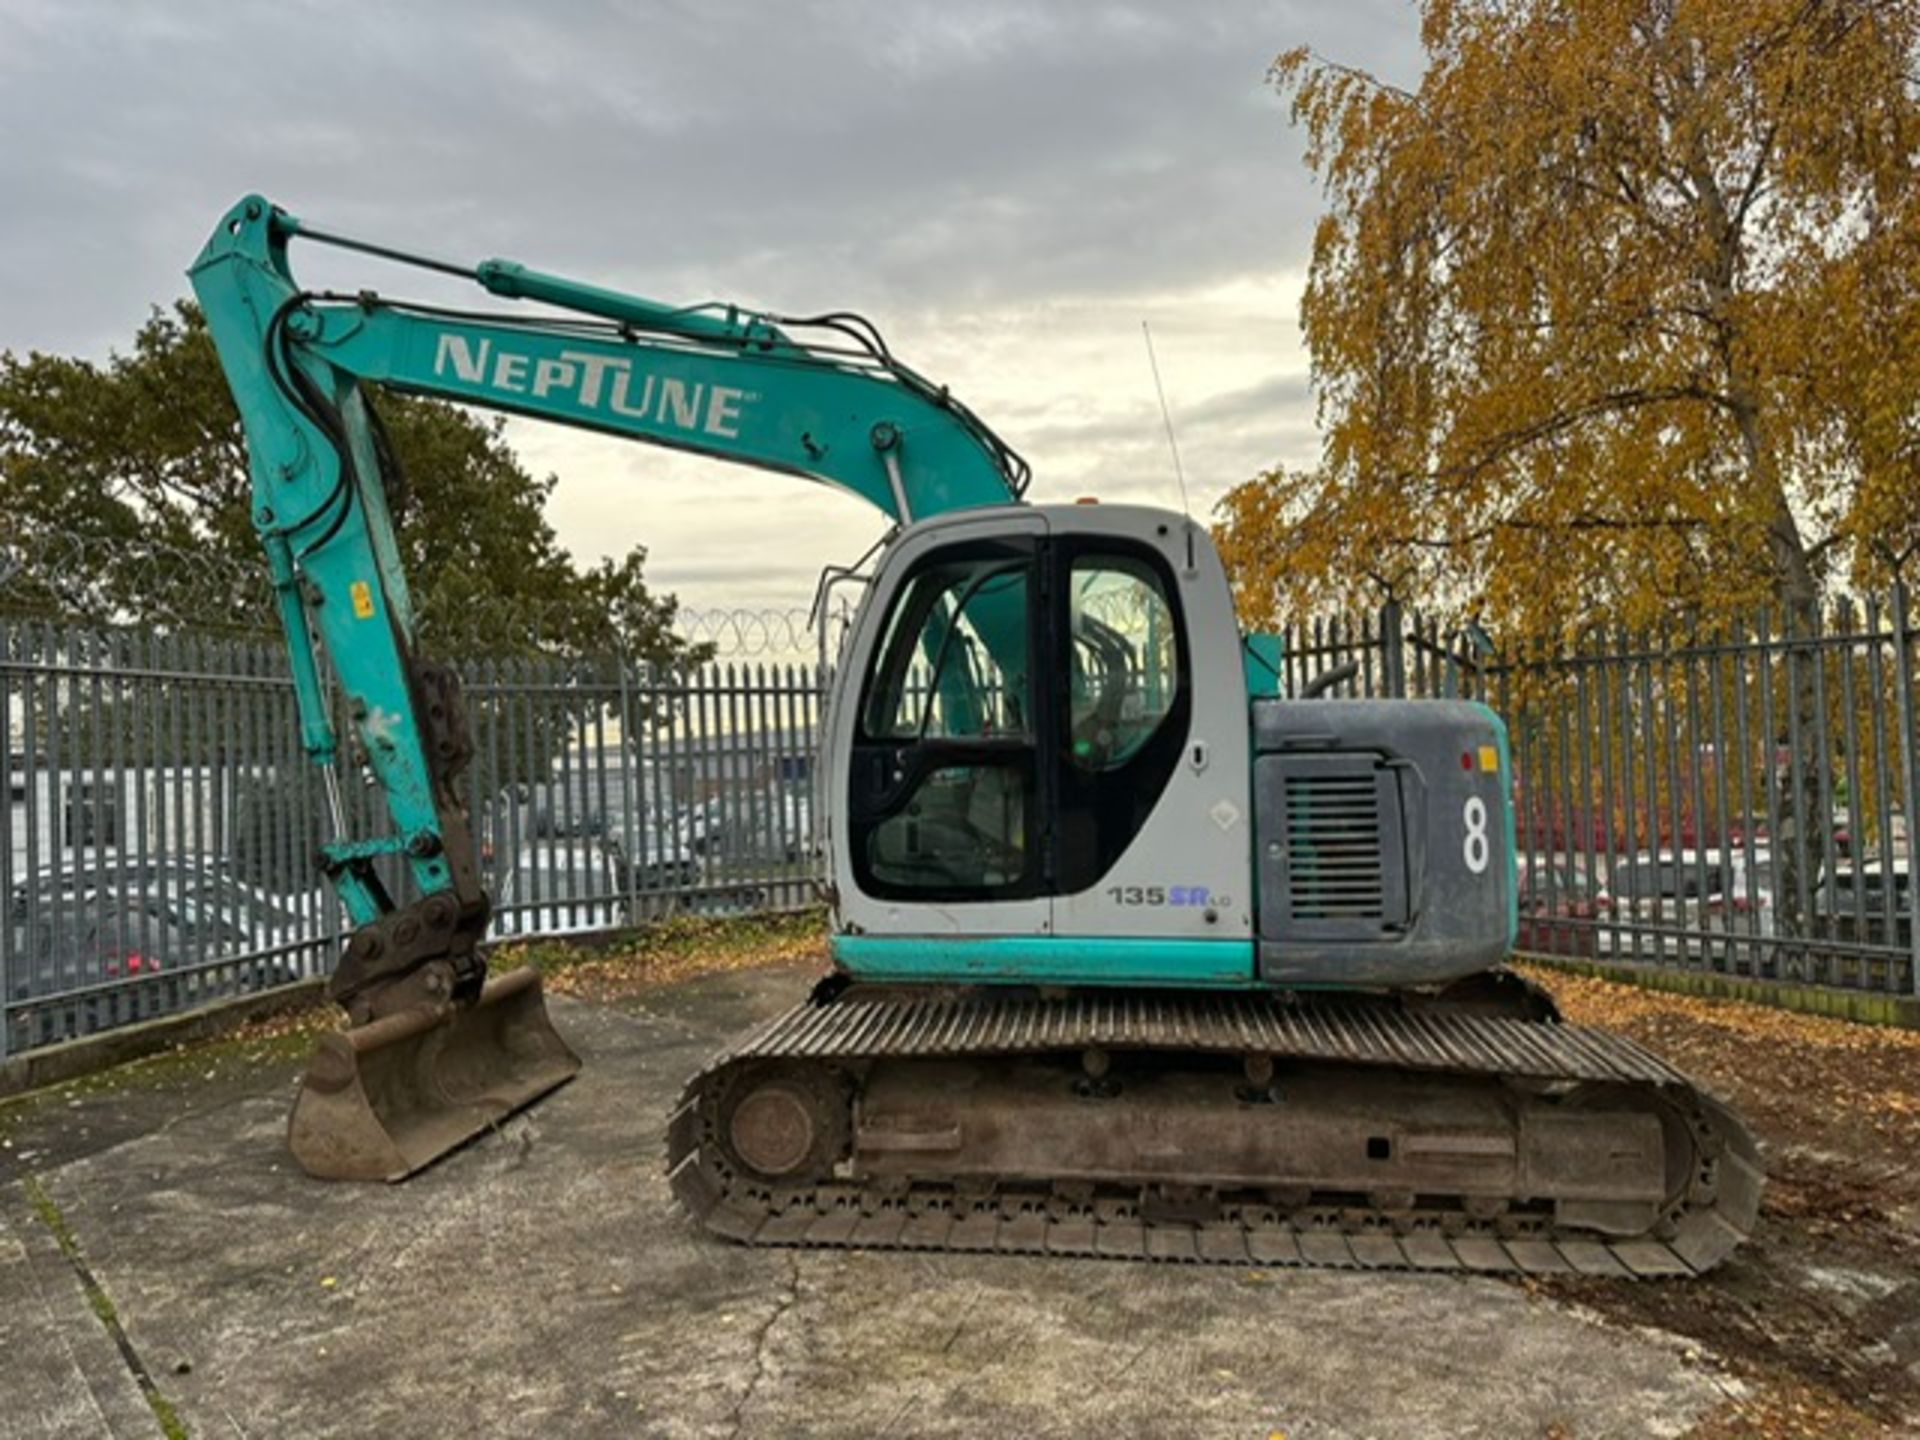 KOBELCO SK135SRLC STEEL TRACKED 14TONNE EXCAVATOR. YEAR 2004 BUILD. WITH ONE GRADING BUCKET AS SHOWN - Image 6 of 7